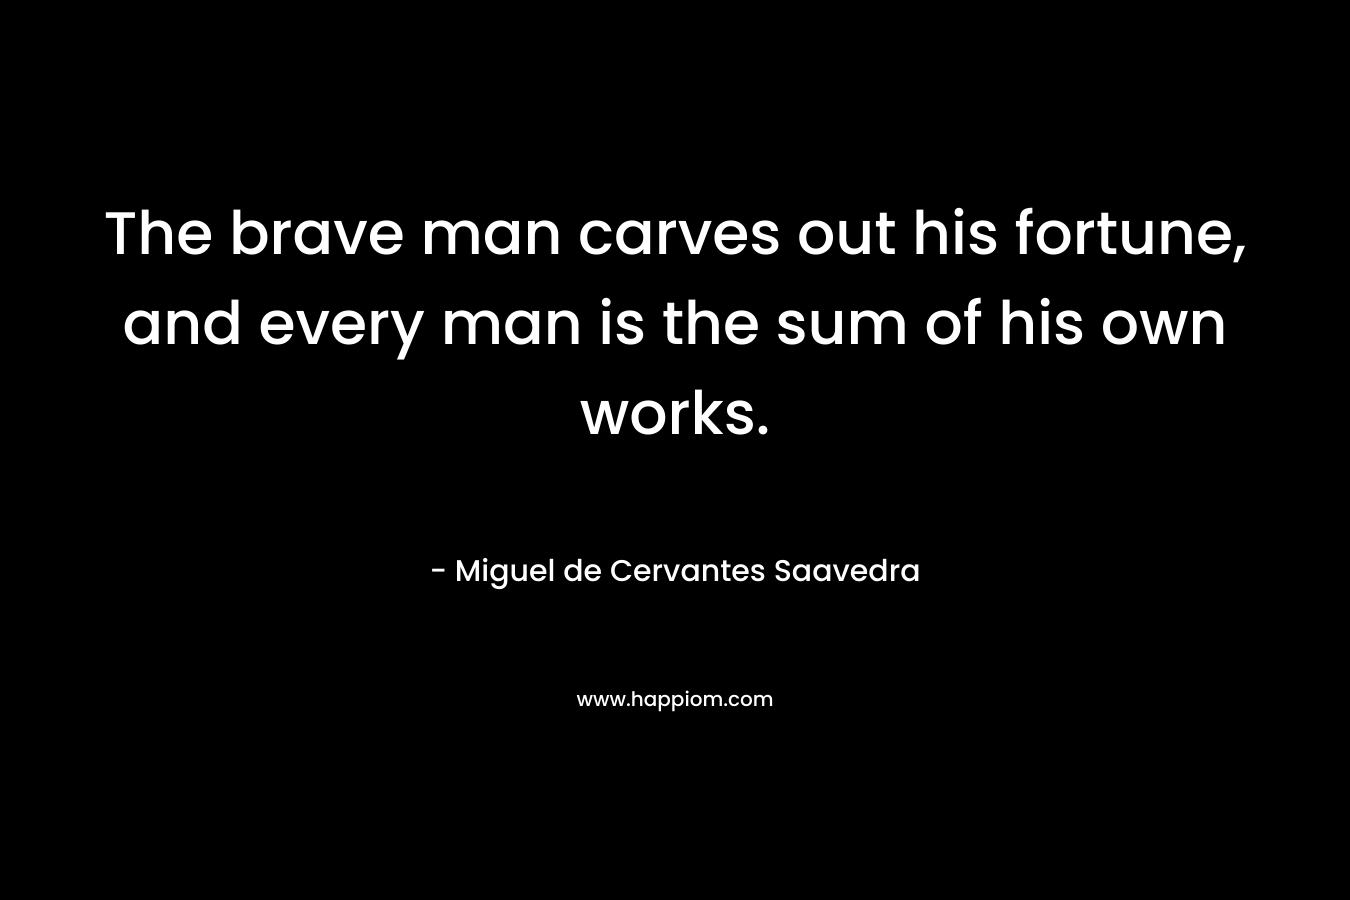 The brave man carves out his fortune, and every man is the sum of his own works. – Miguel de Cervantes Saavedra